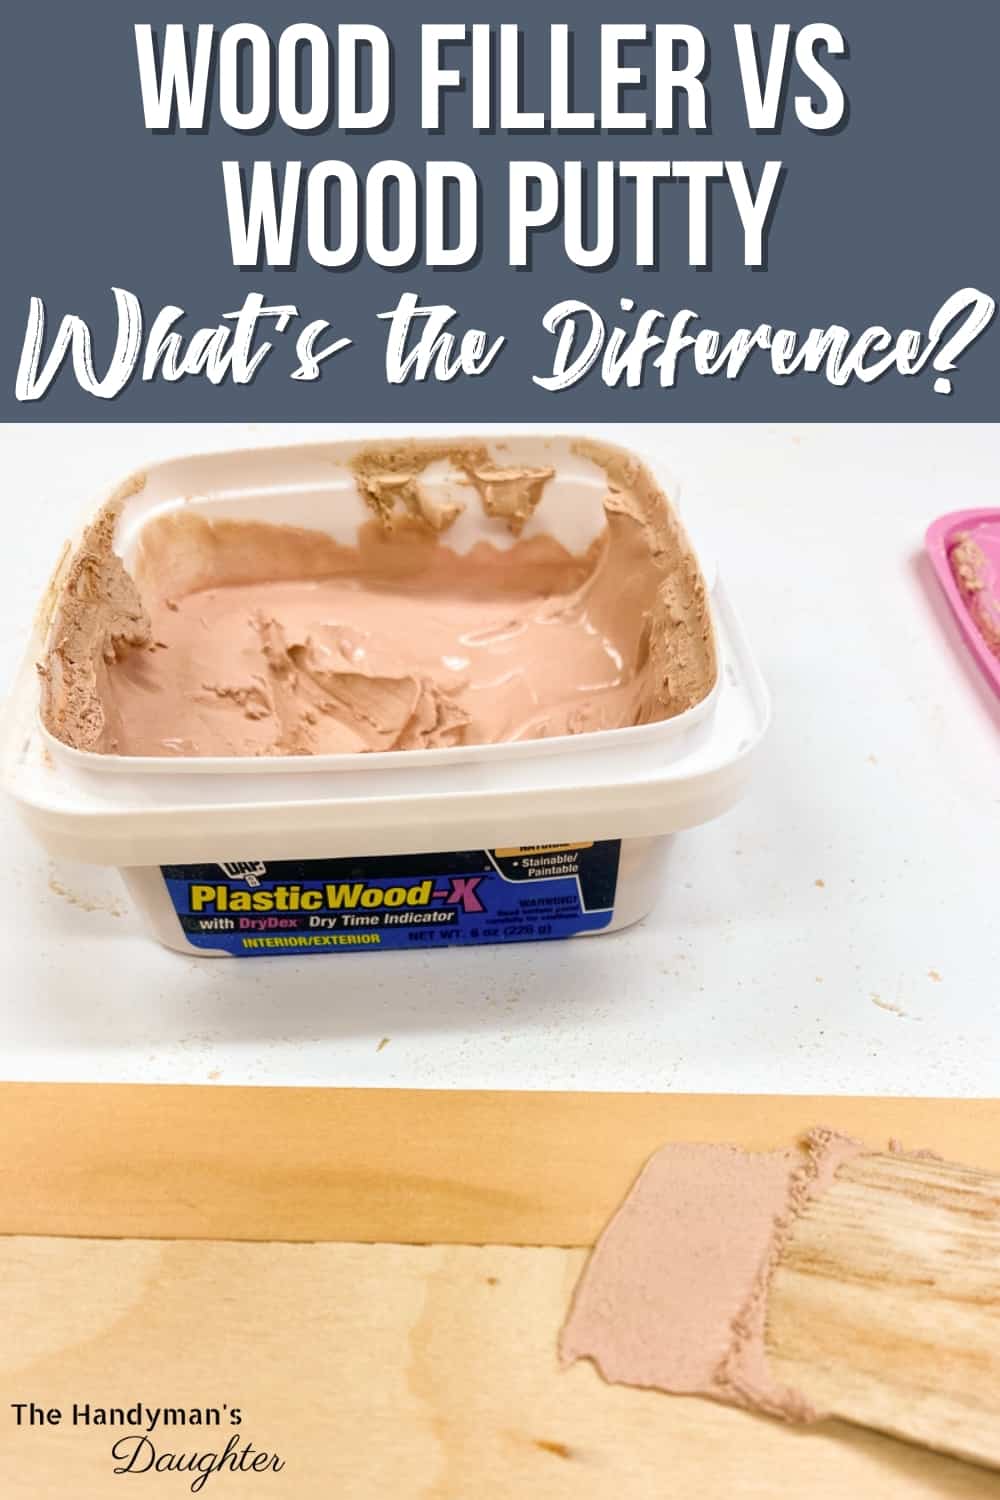 wood filler vs wood putty - what's the difference?